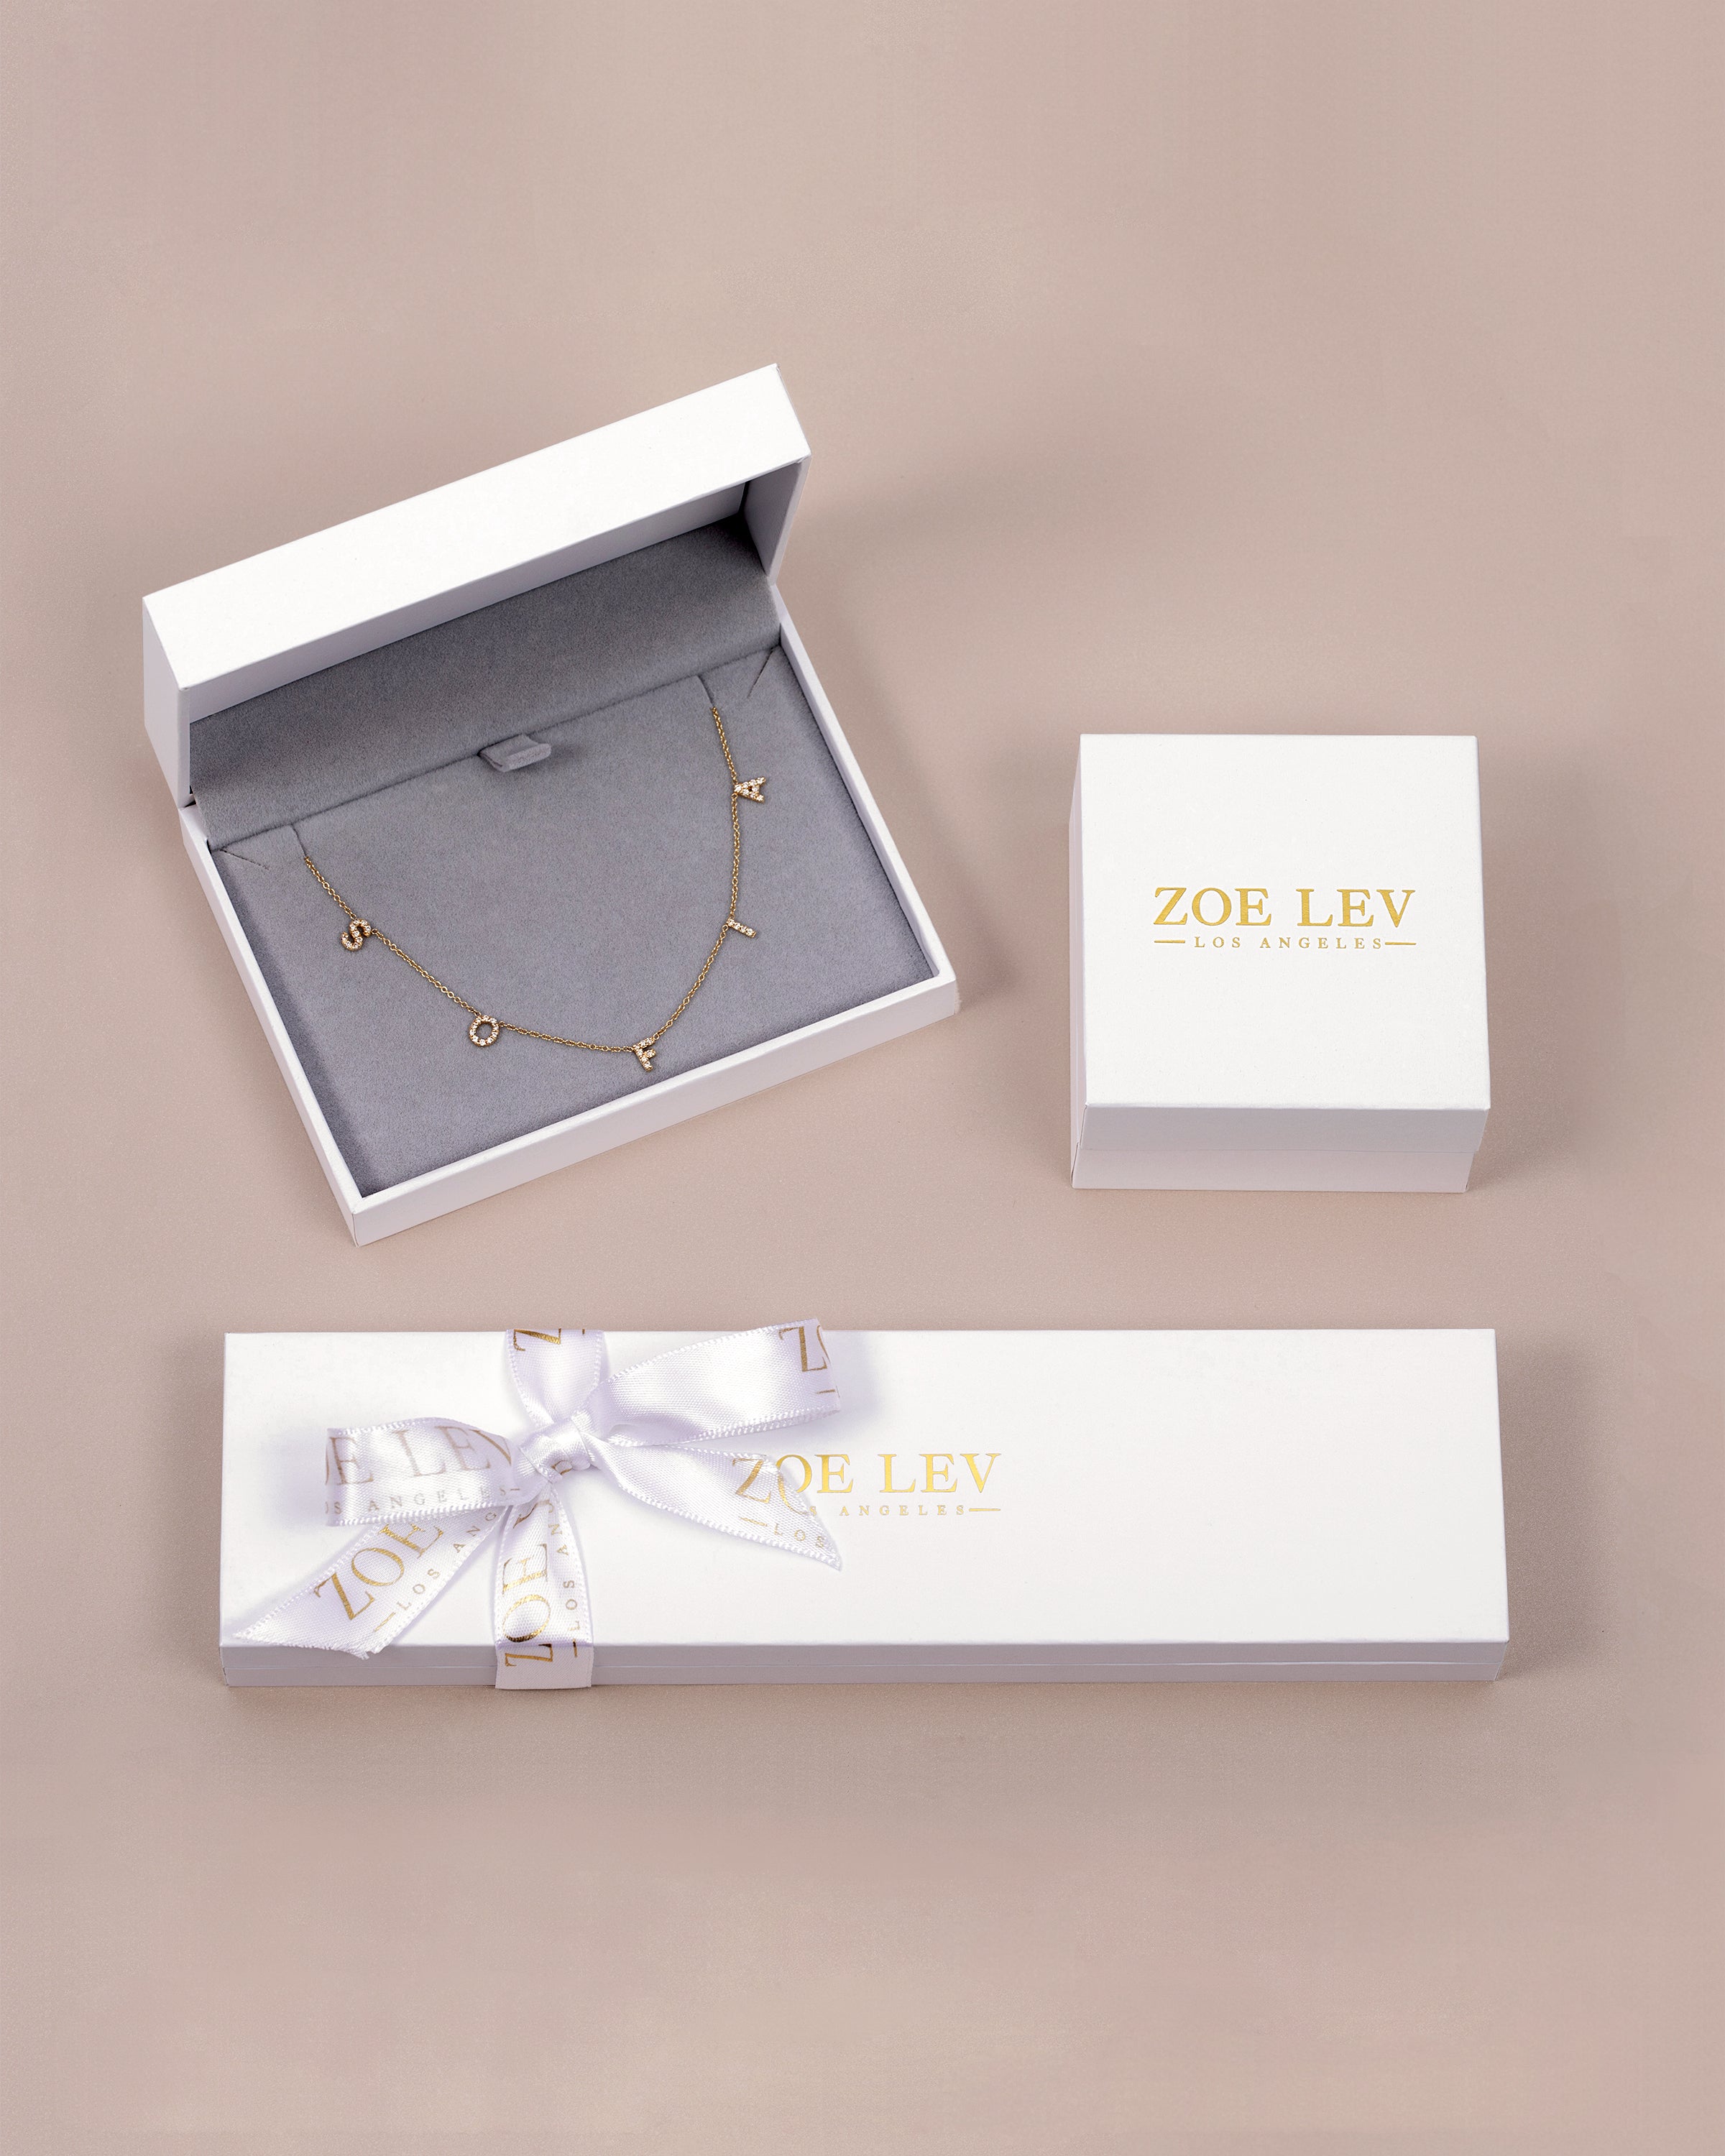 Soft Wave Necklet in Silver and 18ct Yellow Gold Vermeil - Zoe Davidson  Jewellery